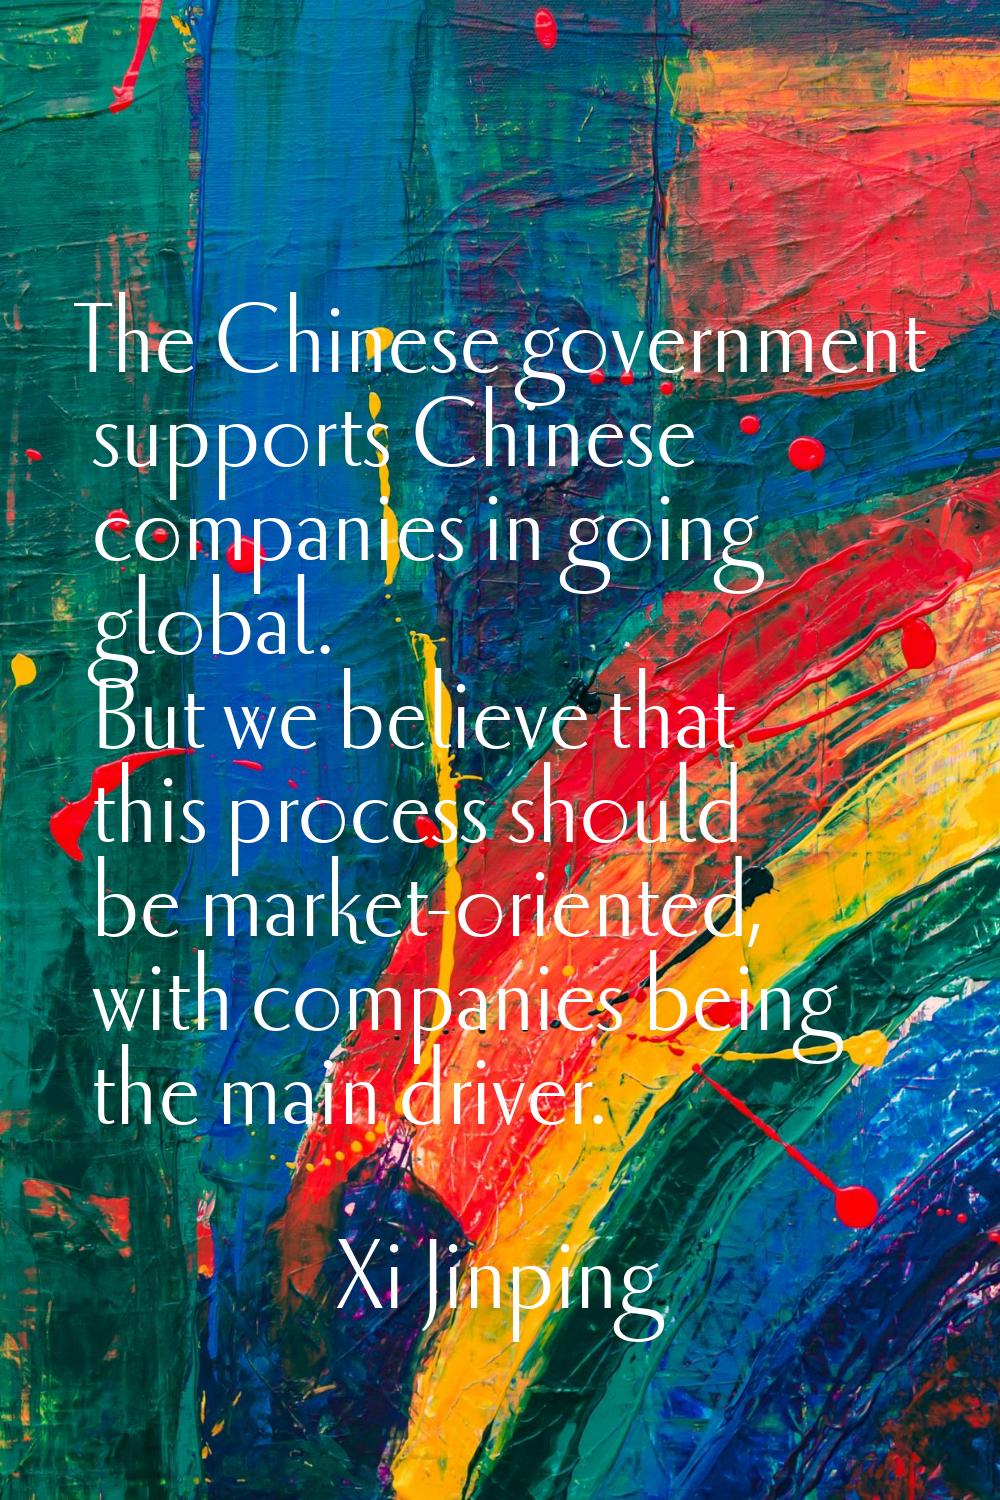 The Chinese government supports Chinese companies in going global. But we believe that this process